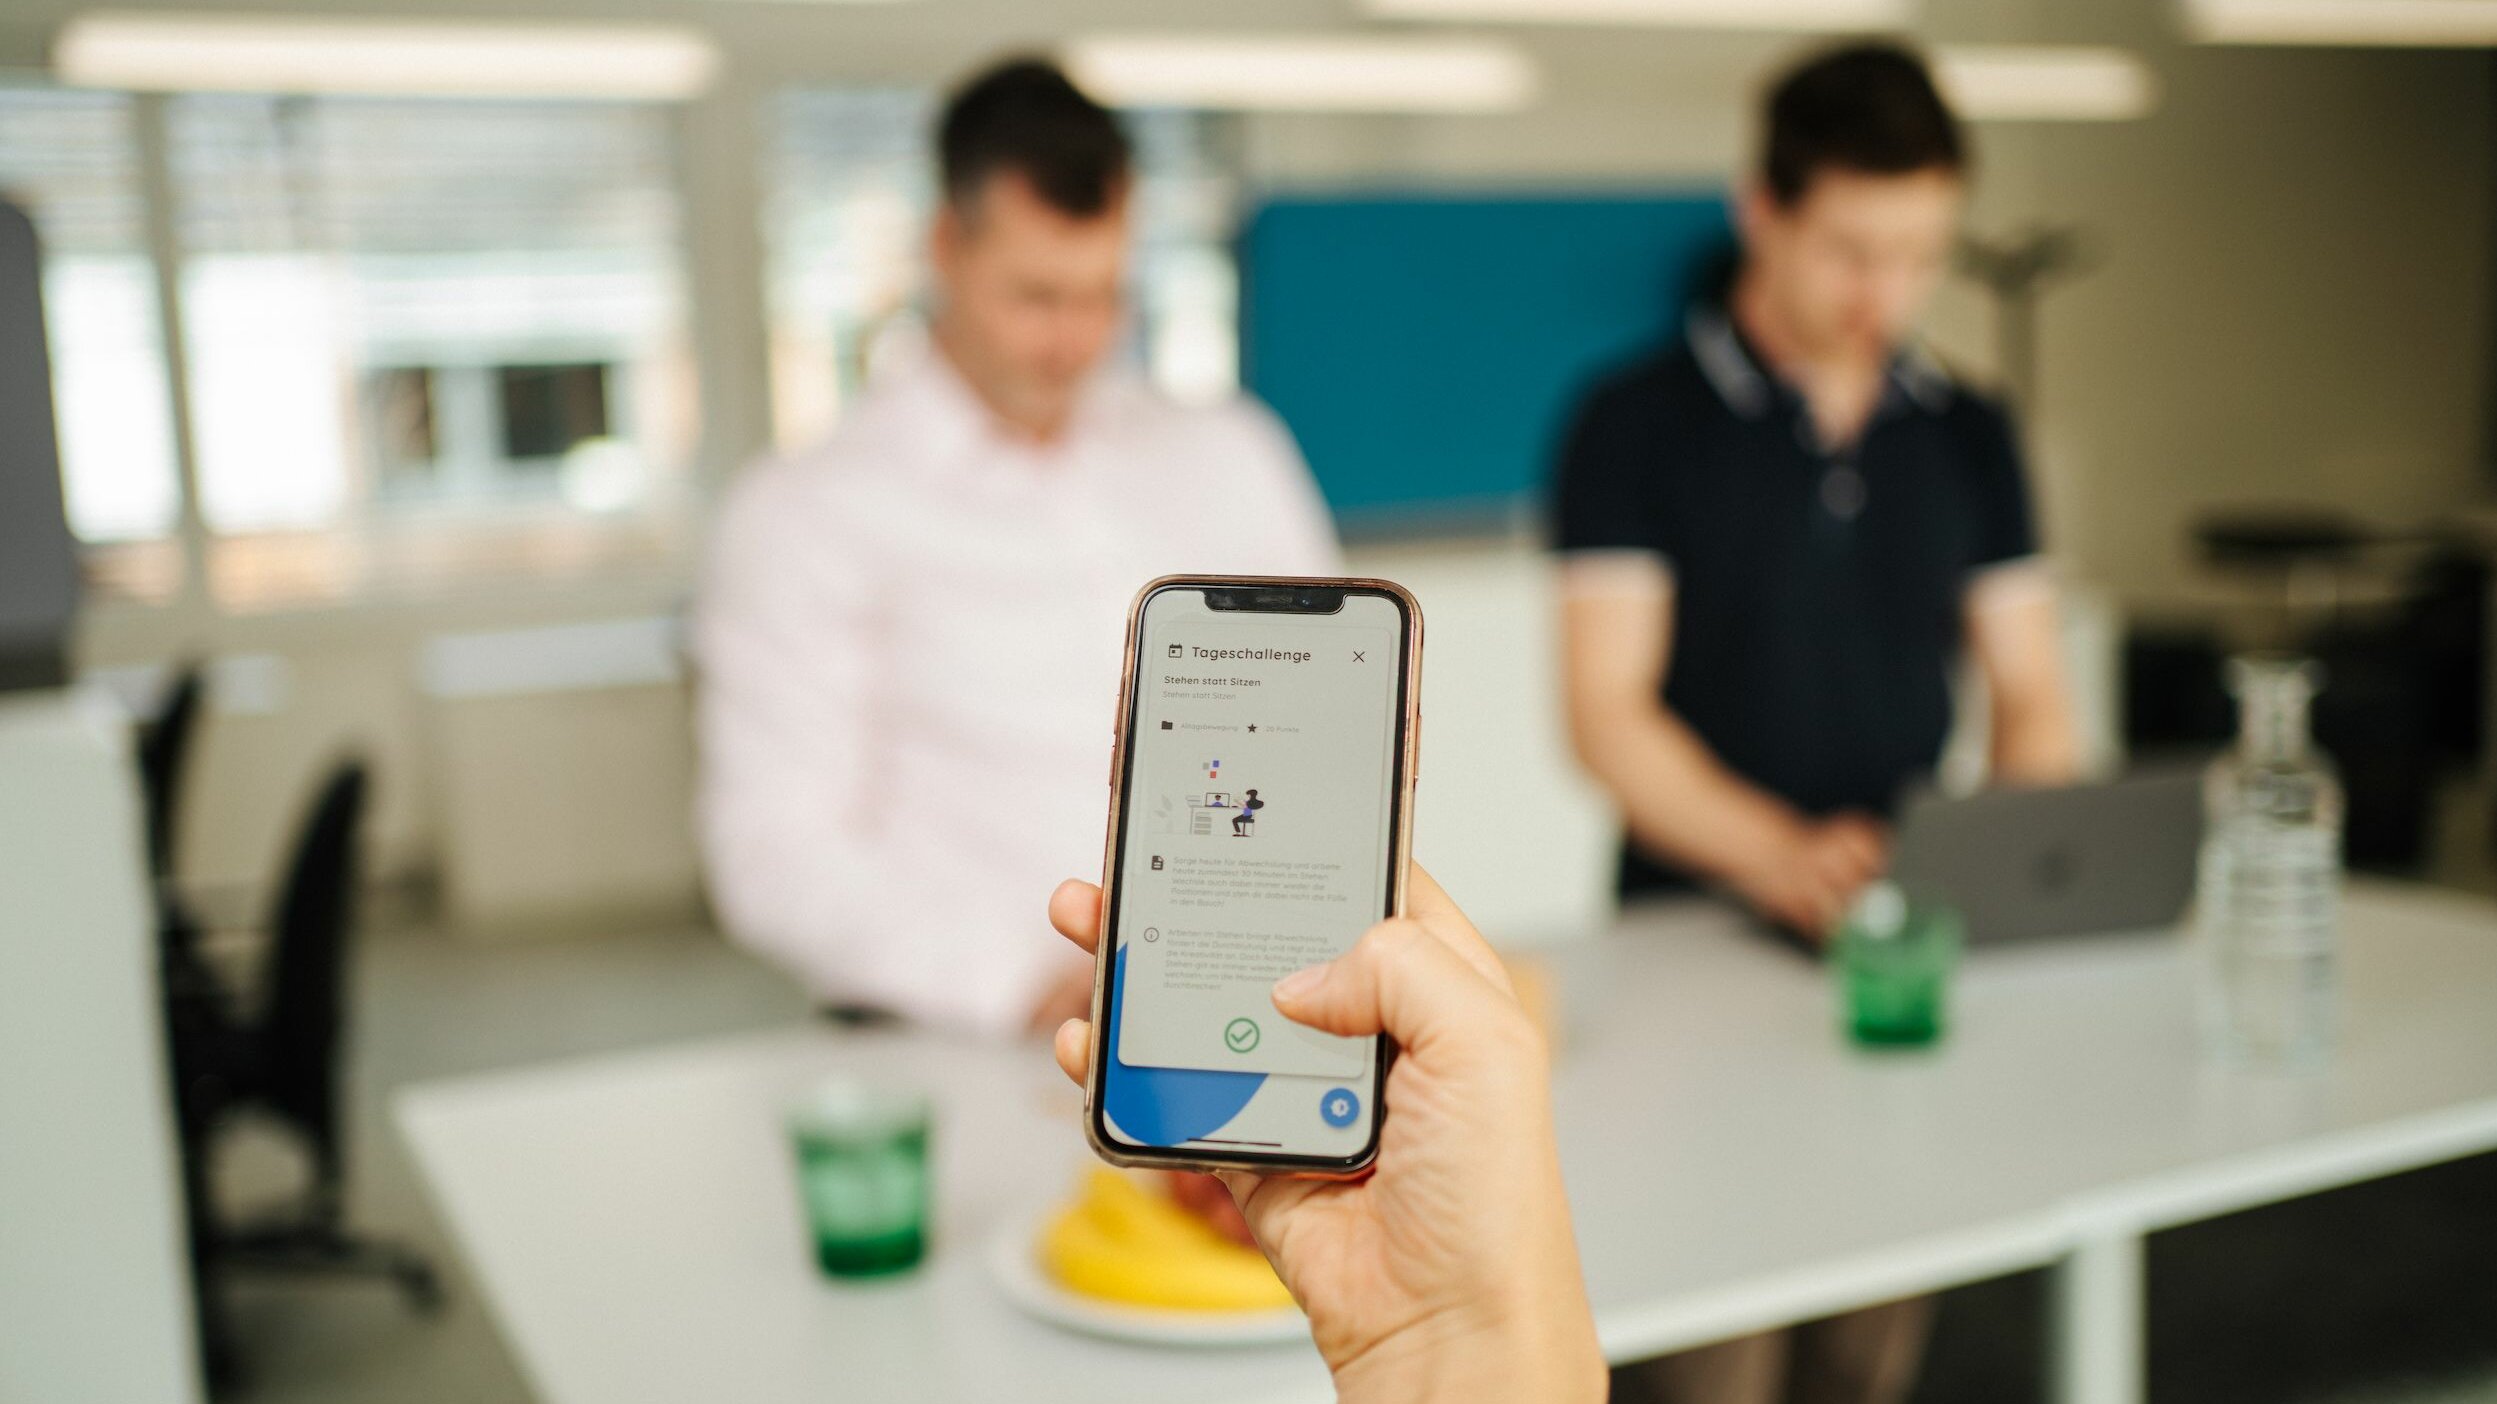 In the MOVEVO app you can find a daily challenge to move your body in the office